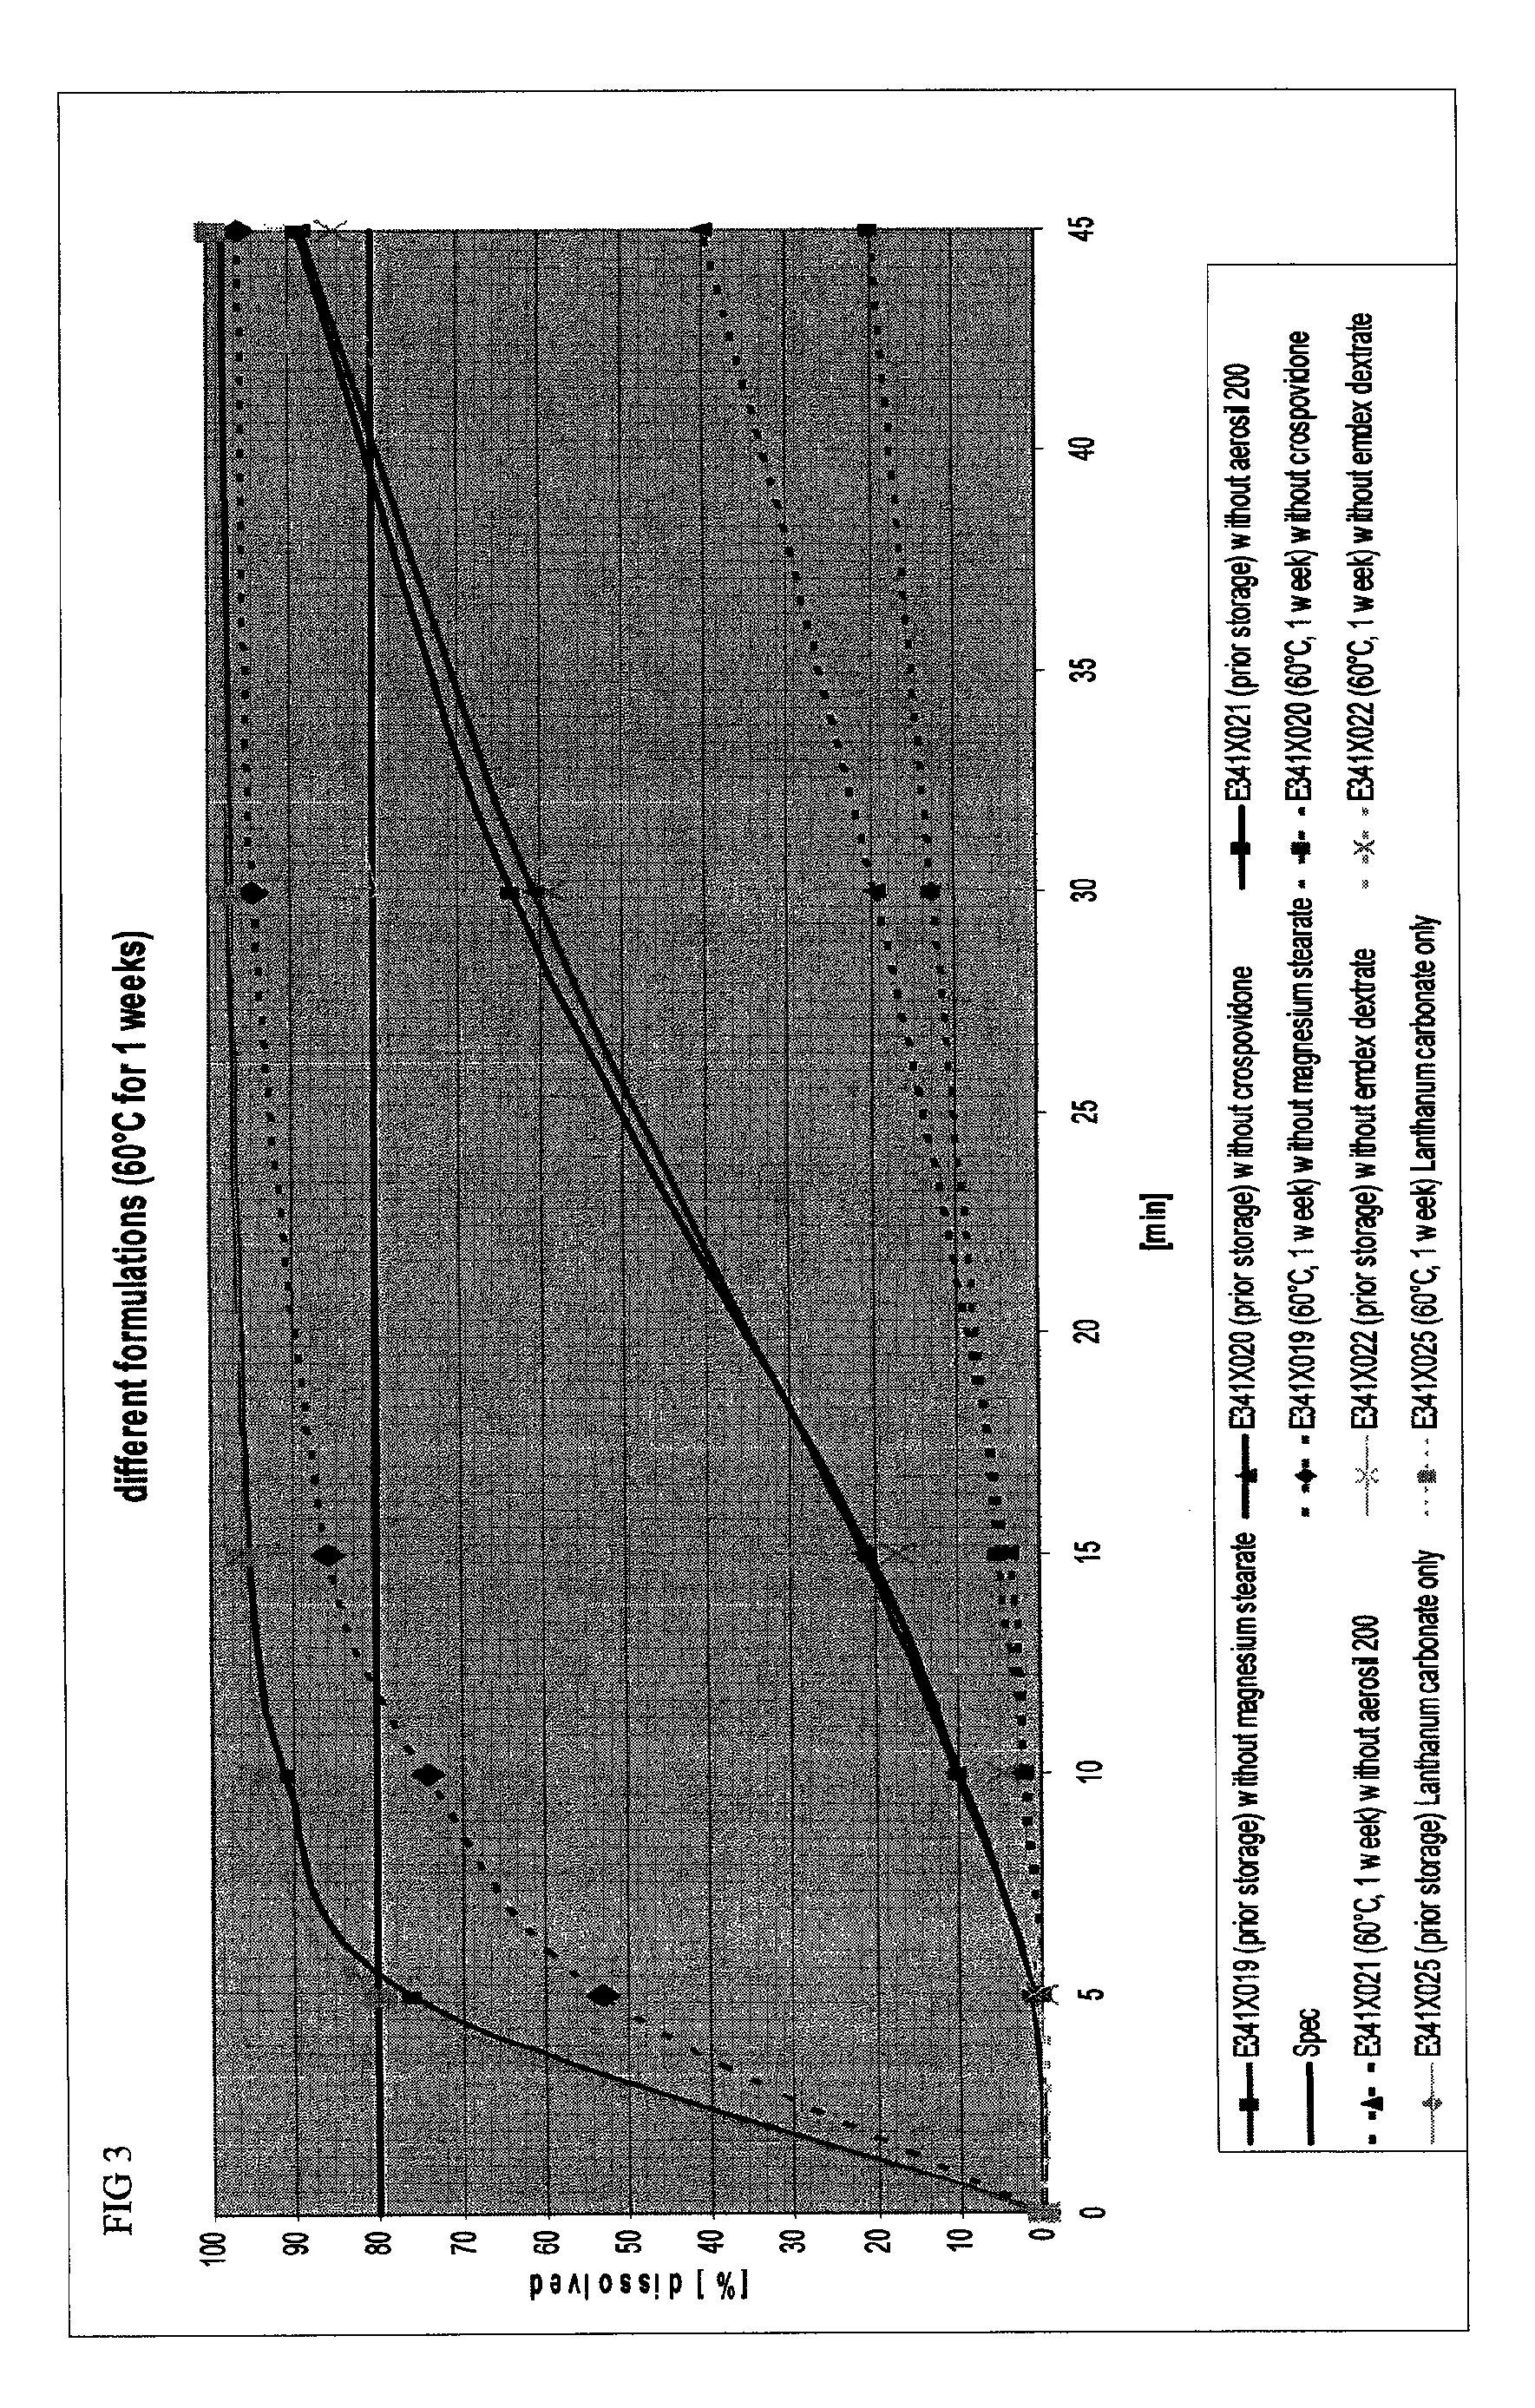 Capsule and powder formulations containing lanthanum compounds